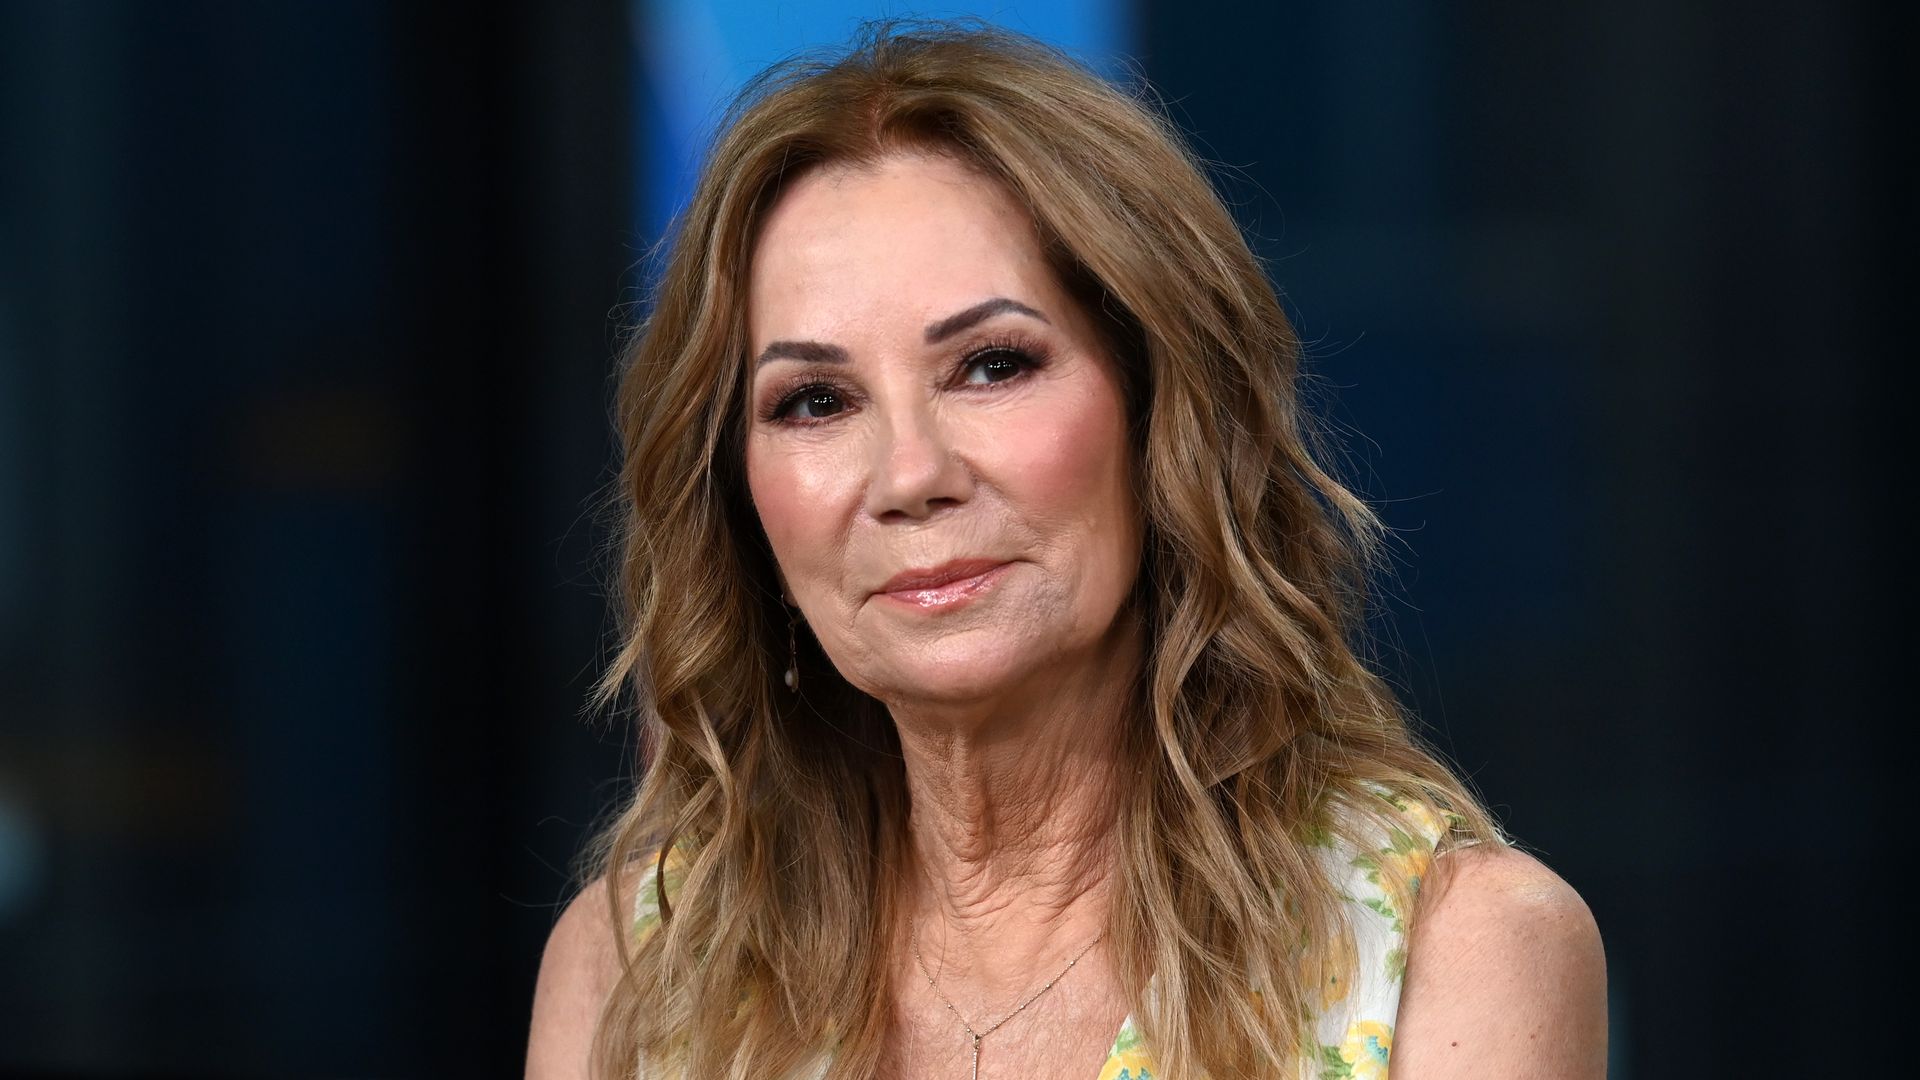 Kathie Lee Gifford during an interview on TV